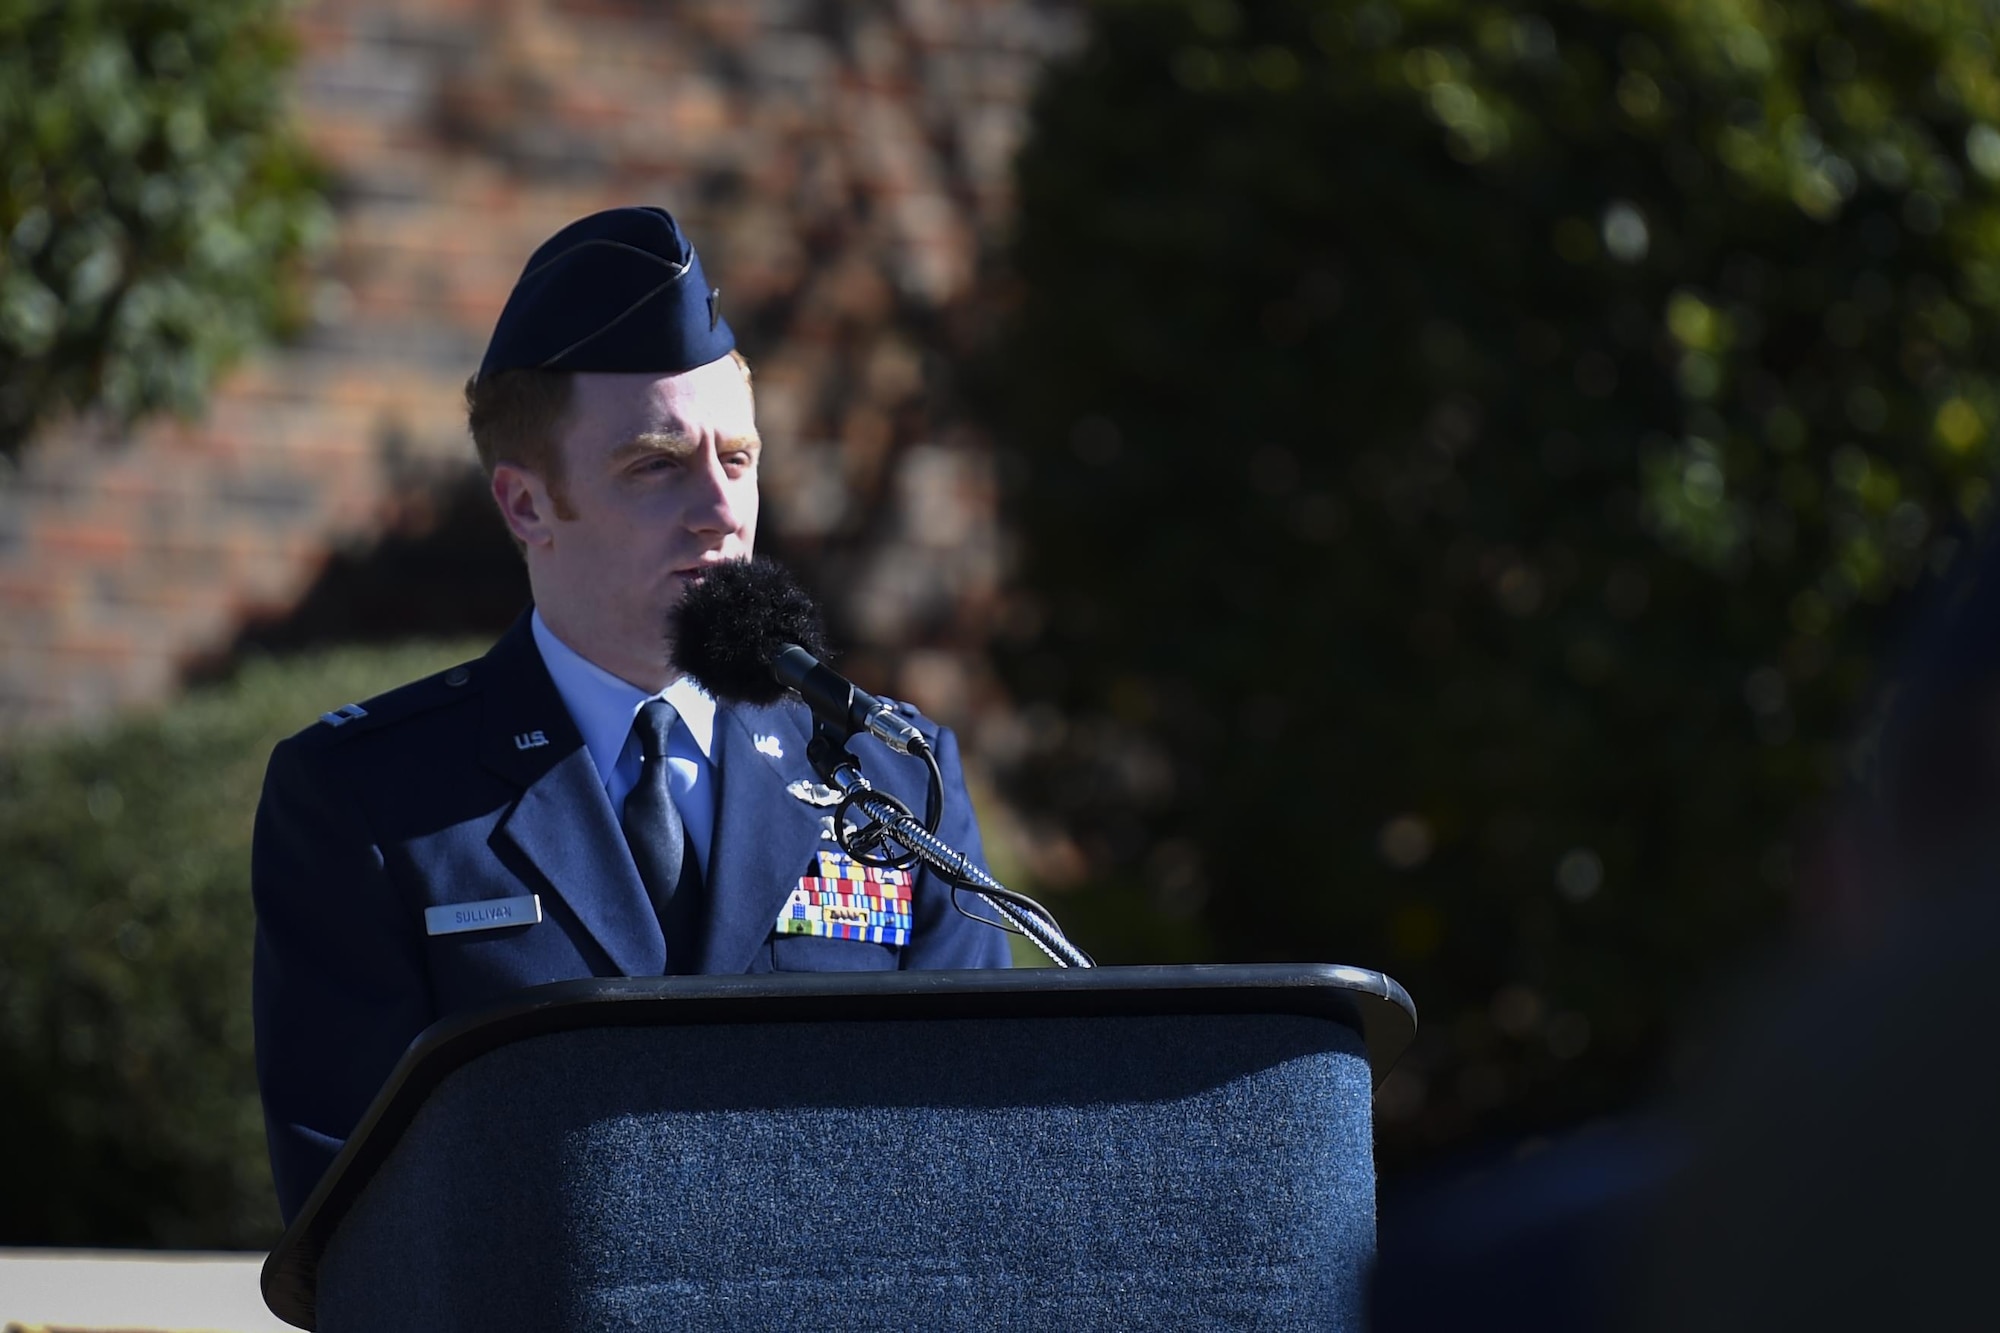 Capt. Sean Sullivan, a flight commander with the 25th Intelligence Squadron, speaks during the Ratchet 33 Memorial Ceremony at the air park, Hurlburt Field, Fla., Feb. 16, 2017. Ratchet 33 was a U-28A intelligence, surveillance, reconnaissance aircraft crewed by four Air Commandos that crashed in Djibouti, Africa, Feb. 18, 2012. The aircrew was comprised of Capt. Ryan Hall, Capt. Nicholas Whitlock, 1st Lt. Justin Wilkens and Senior Airman Julian Scholten. (U.S. Air Force photo by Airman 1st Class Joseph Pick)